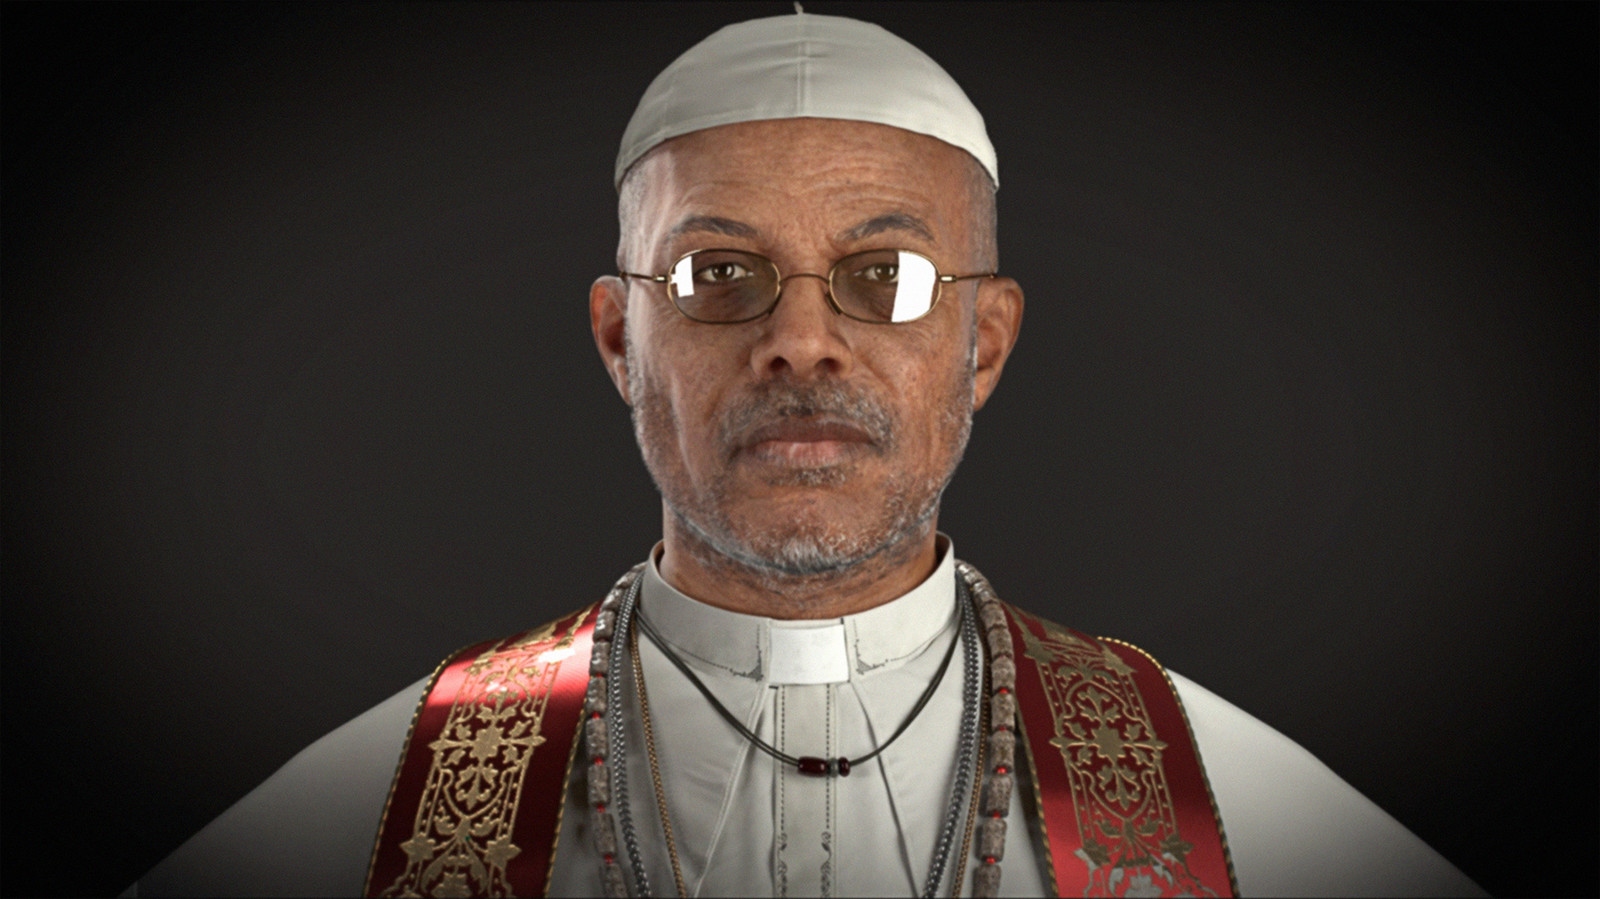 Cardinal, character Texturing and Lookdev